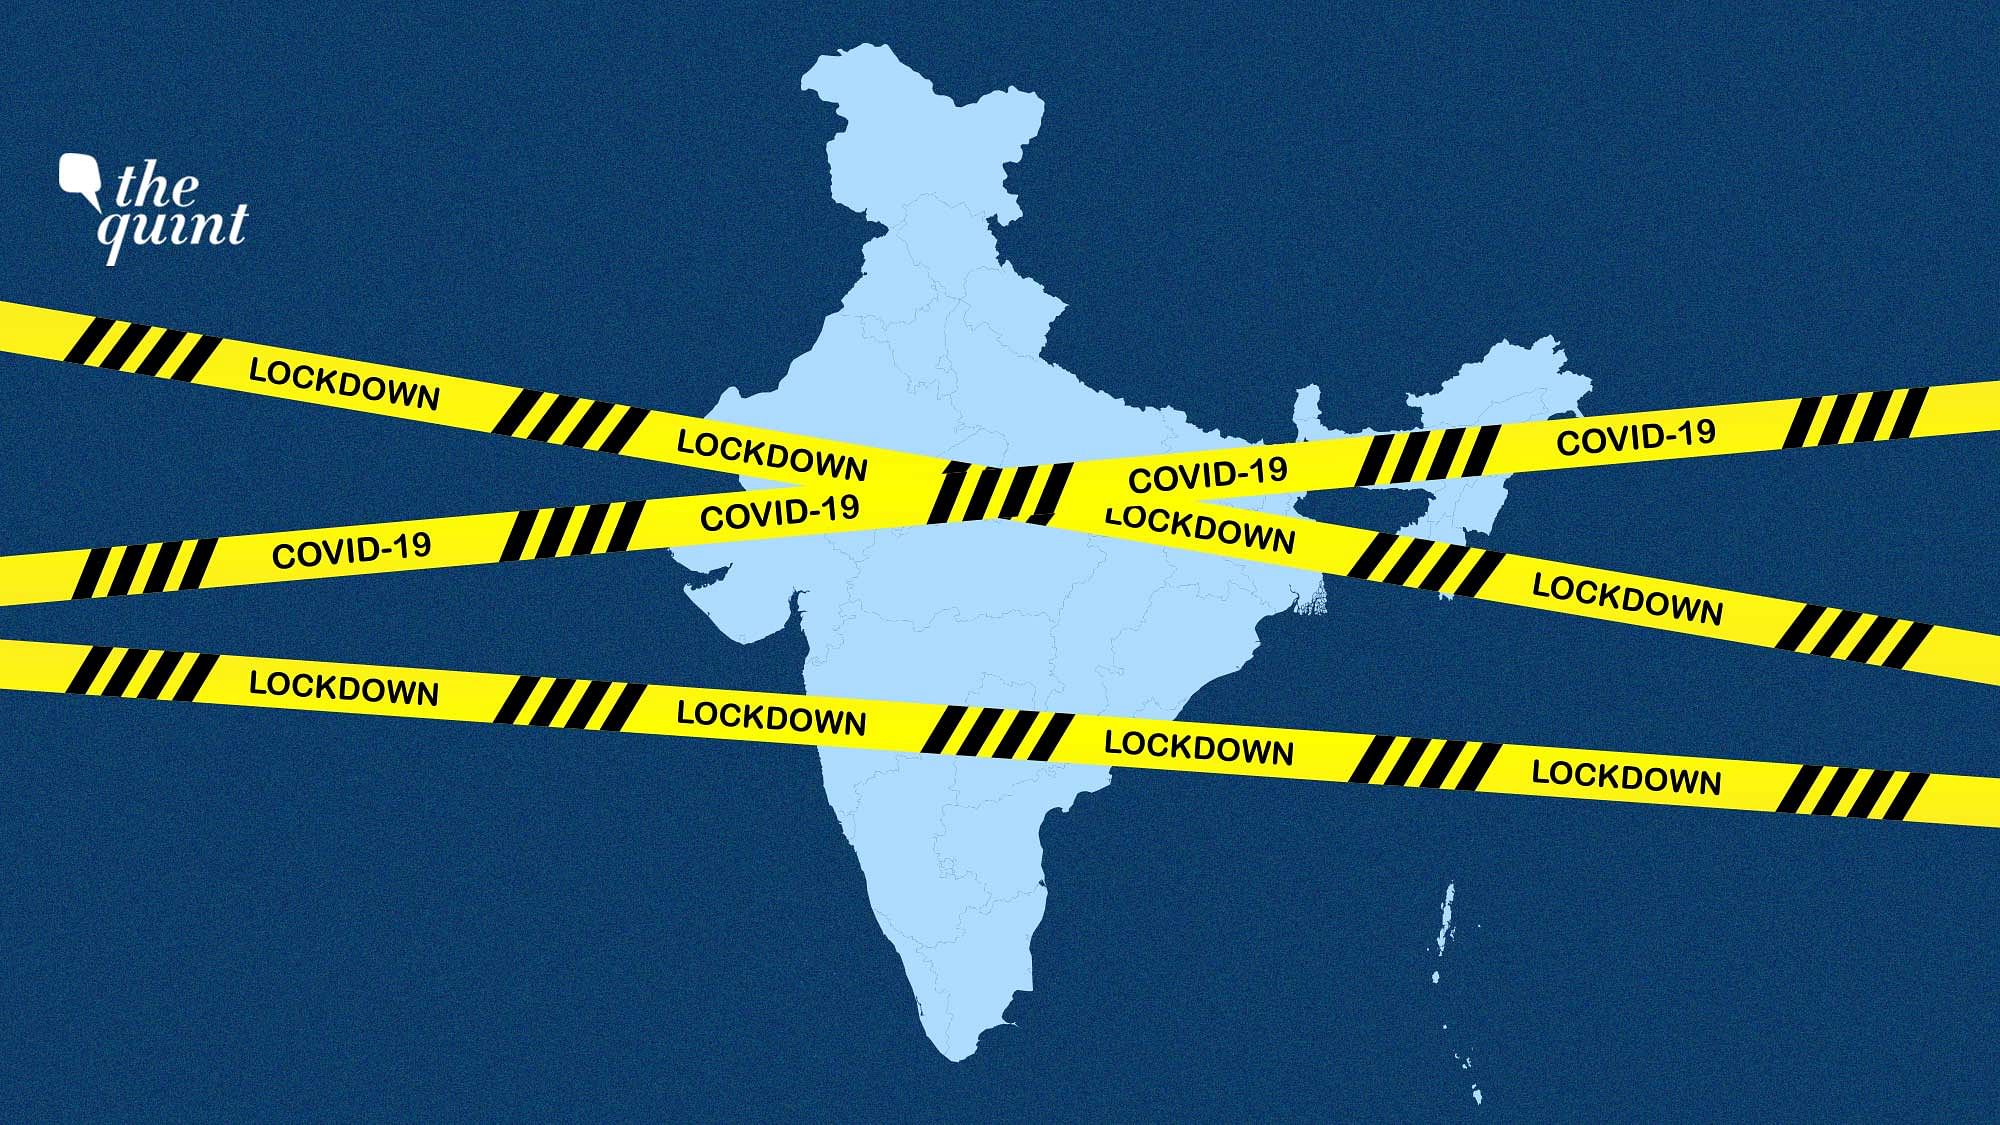 Here’s all you need to know about lockdown rules from 20 April. Read on.